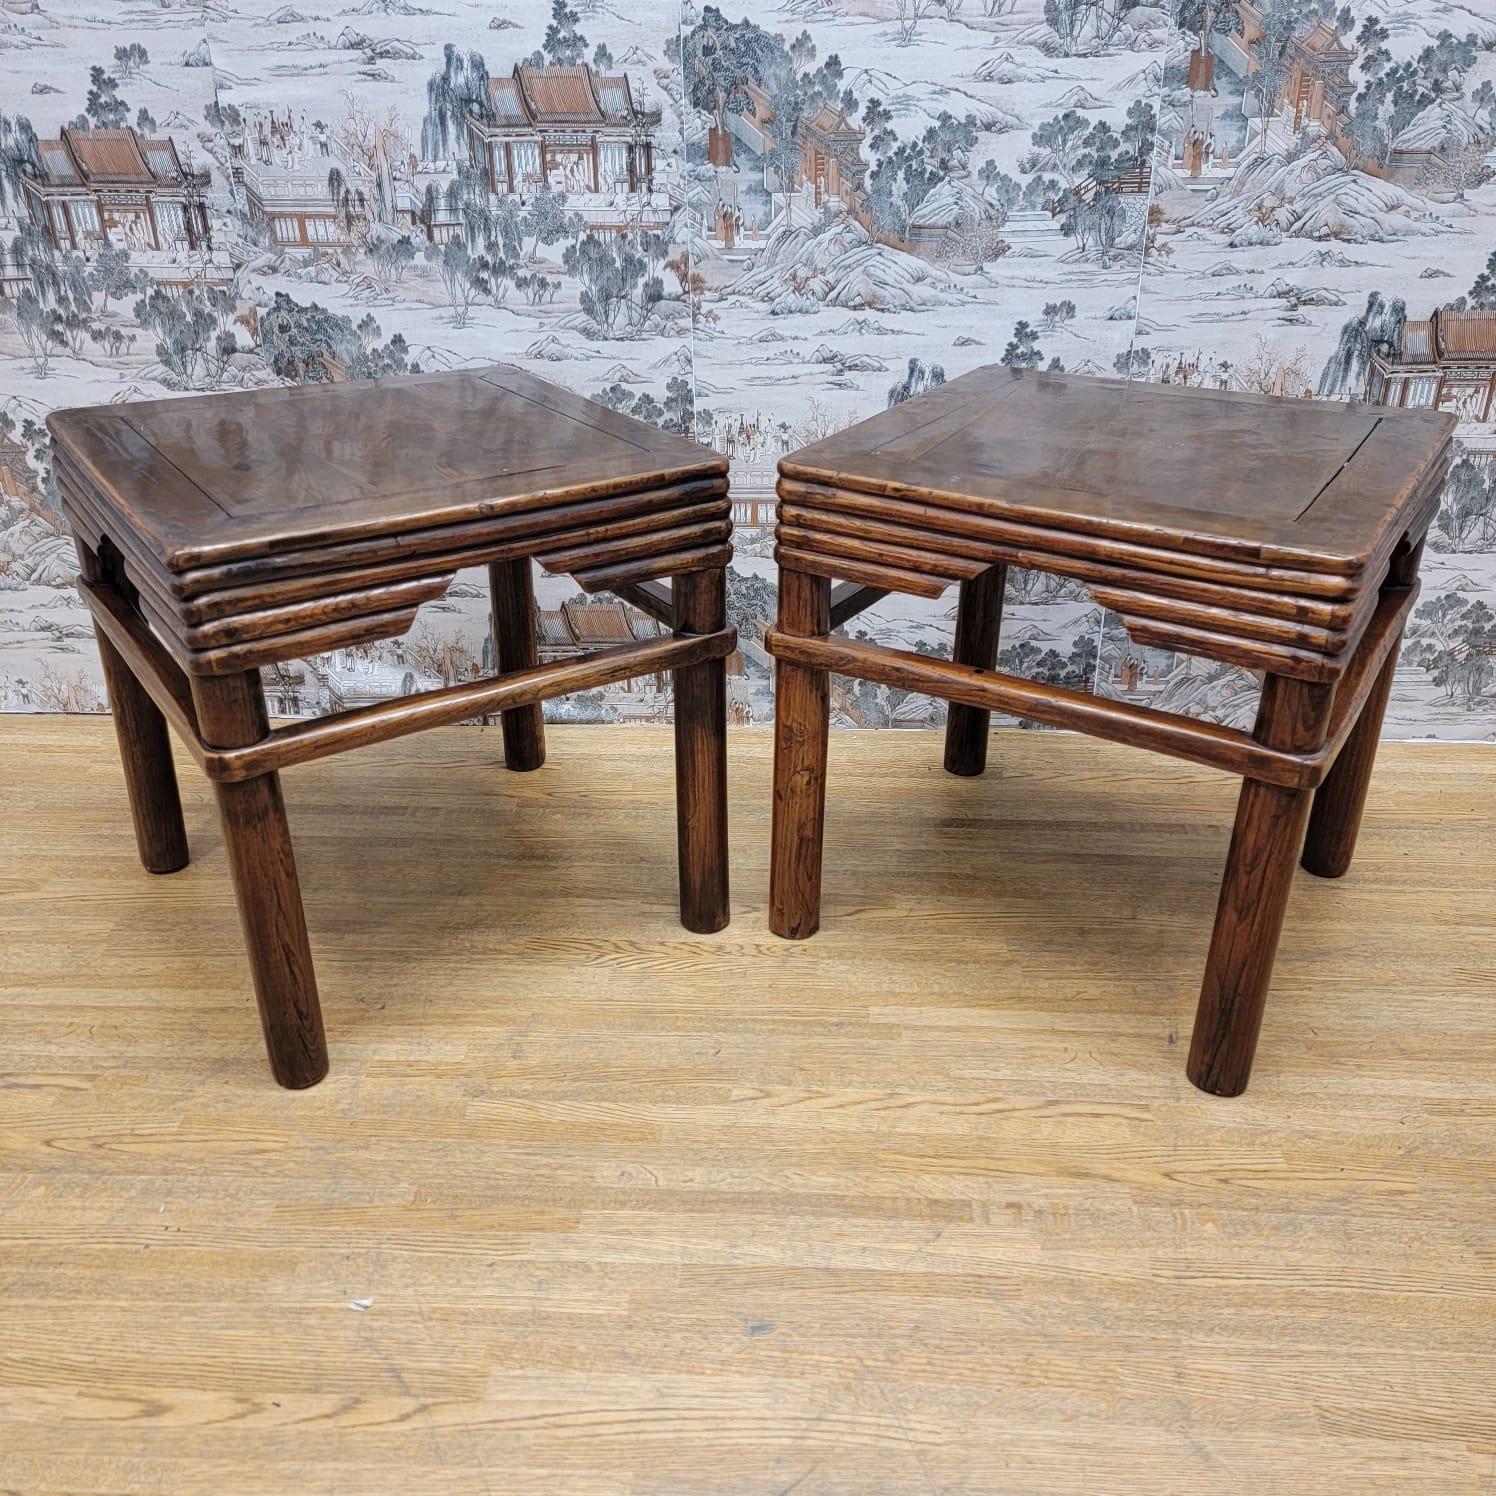 Mid-19th Century Antique Shanxi Province Pierced Apron Elm Side Table - Pair For Sale